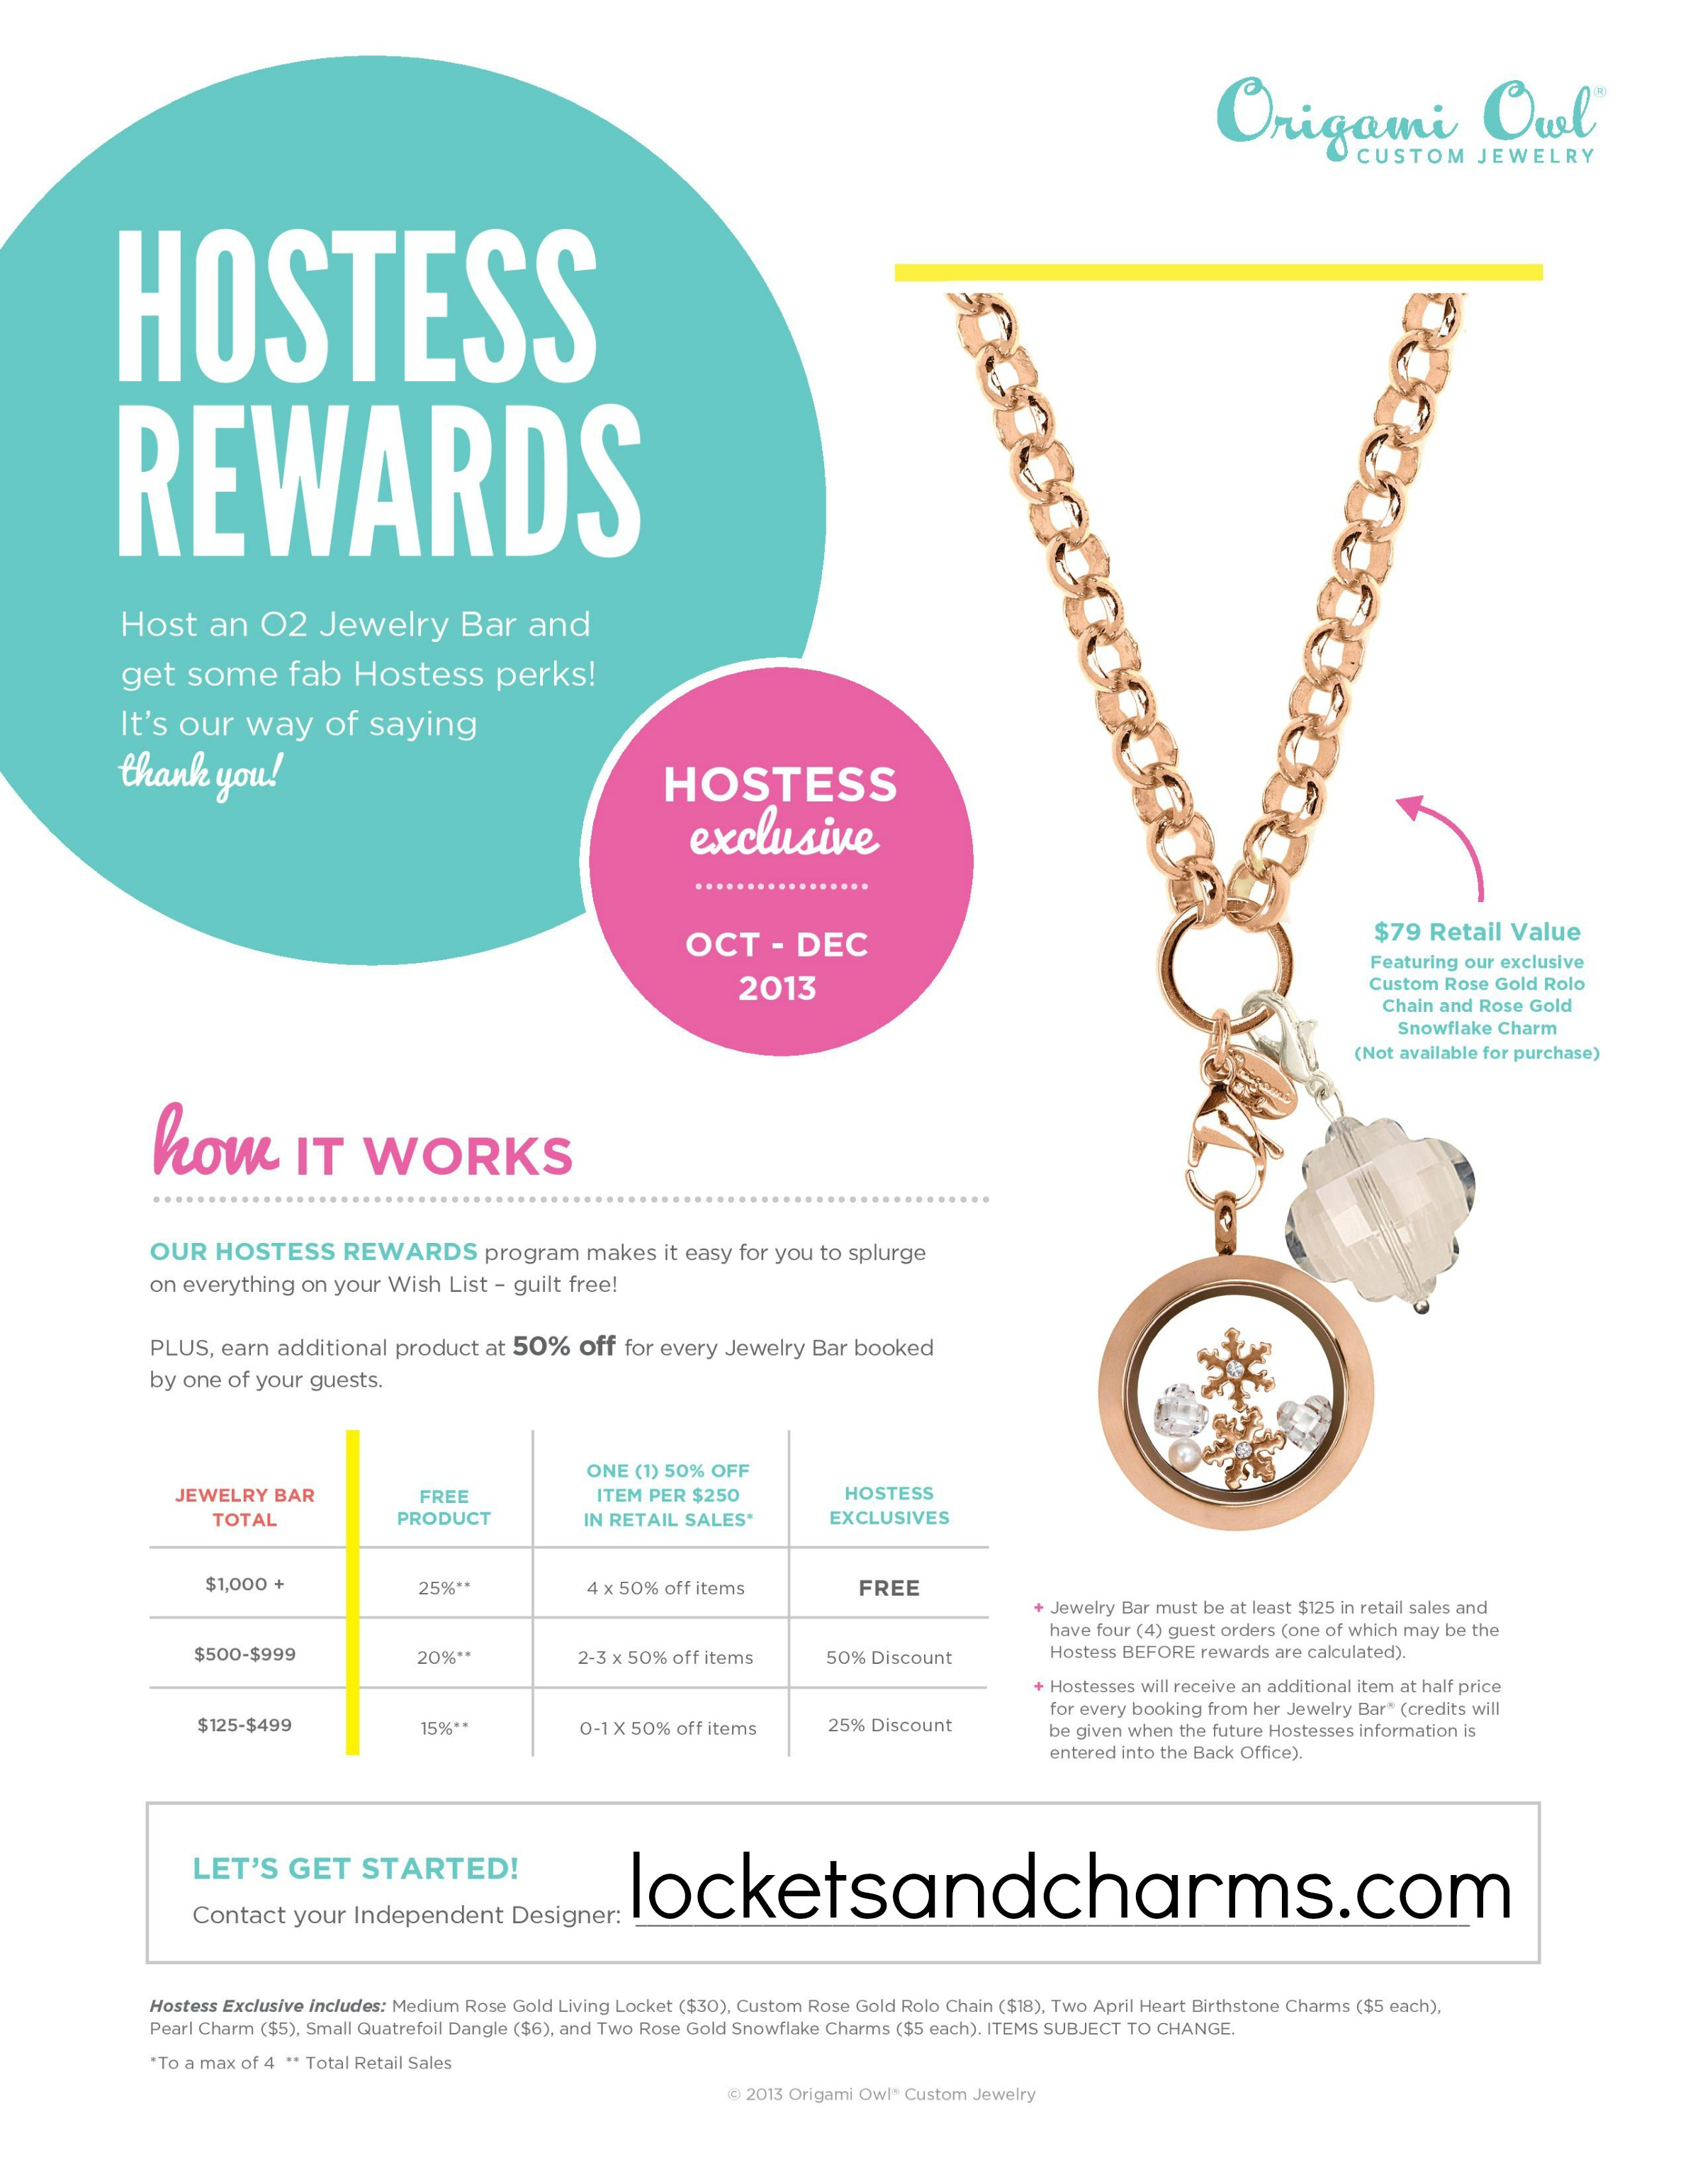 Origami Owl October Specials What Is The Origami Owl Hostess Exclusive For October San Diego